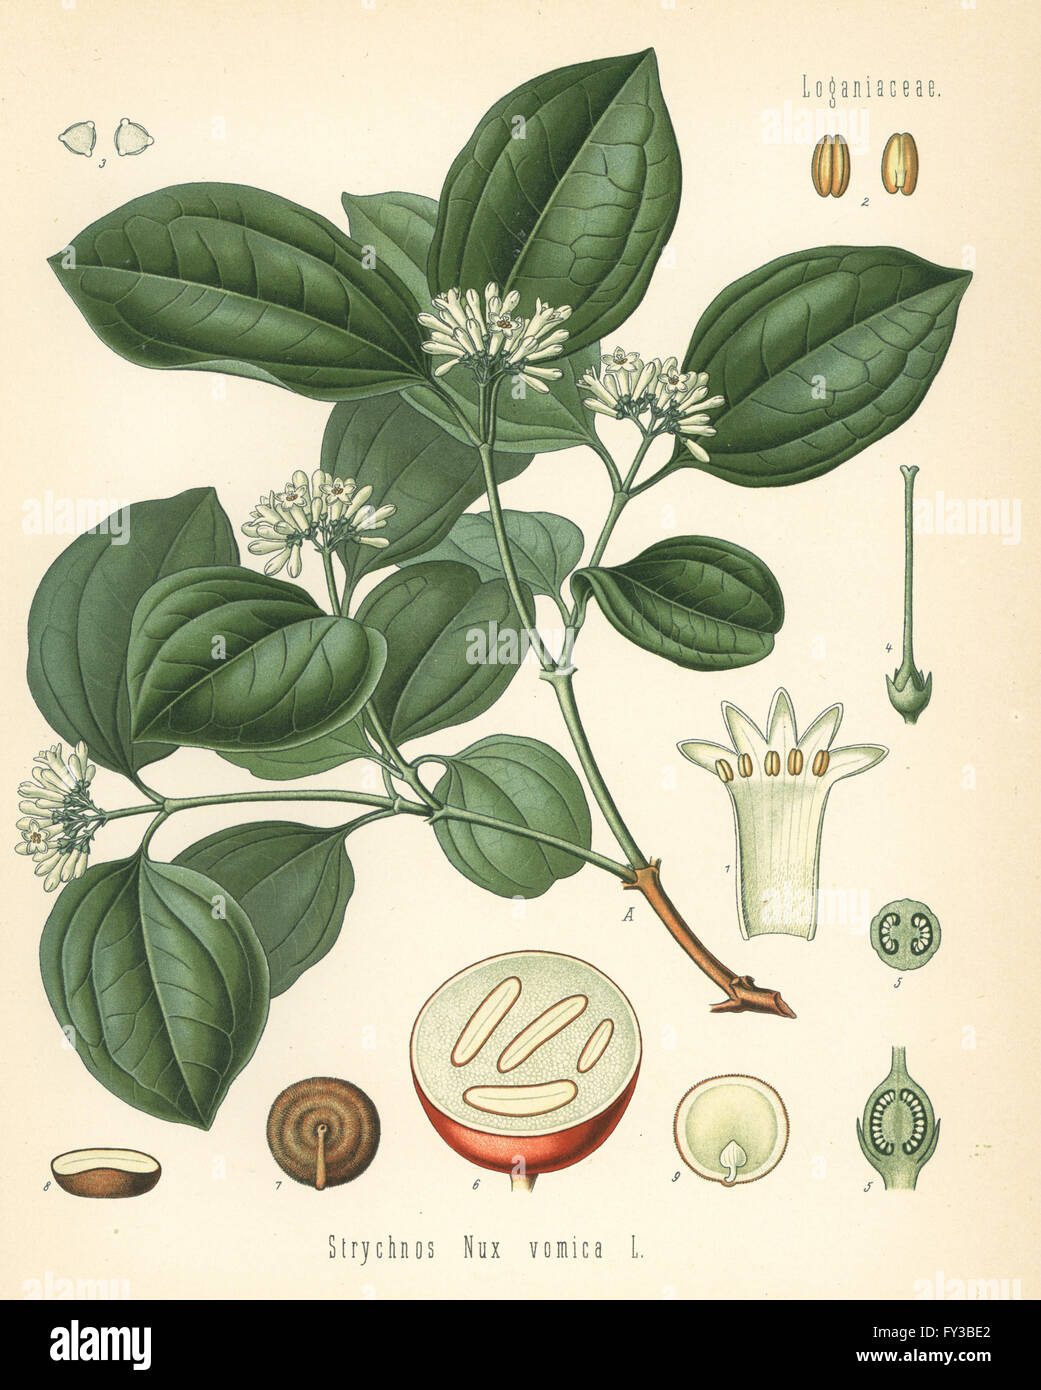 Strychnine tree, Strychnos nux-vomica. Chromolithograph after a botanical illustration from Hermann Adolph Koehler's Medicinal Plants, edited by Gustav Pabst, Koehler, Germany, 1887. Stock Photo